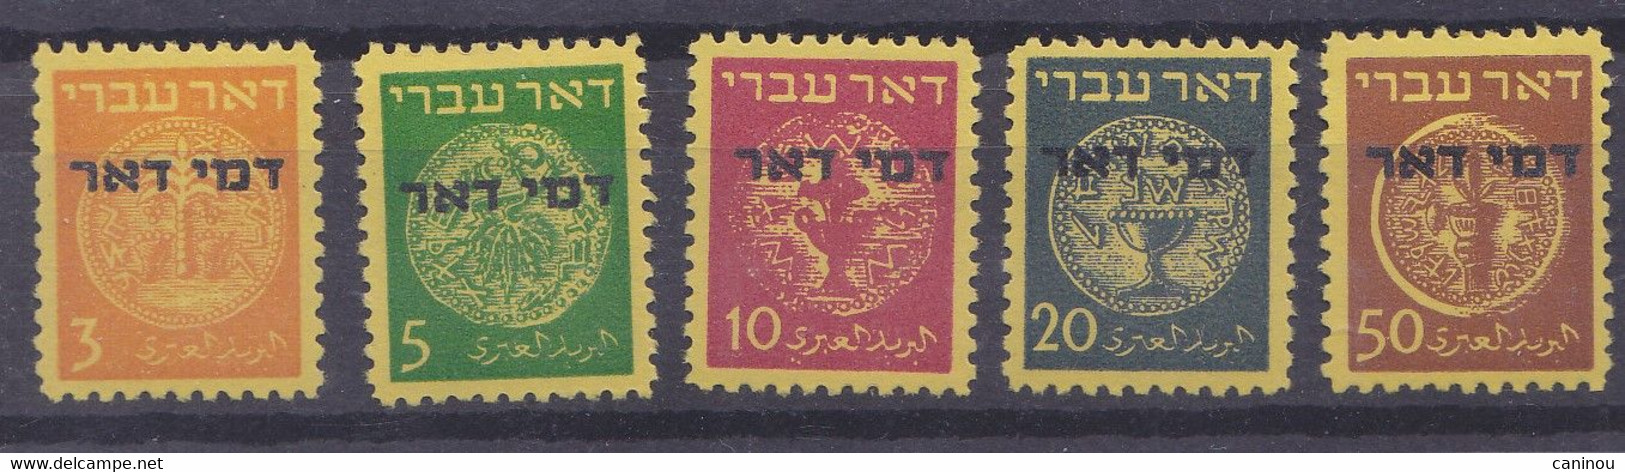 ISRAEL TIMBRES TAXE 1948 Y & T 1-5 MONNAIES ANCIENNES NEUFS TRACES CHARNIERES - Impuestos